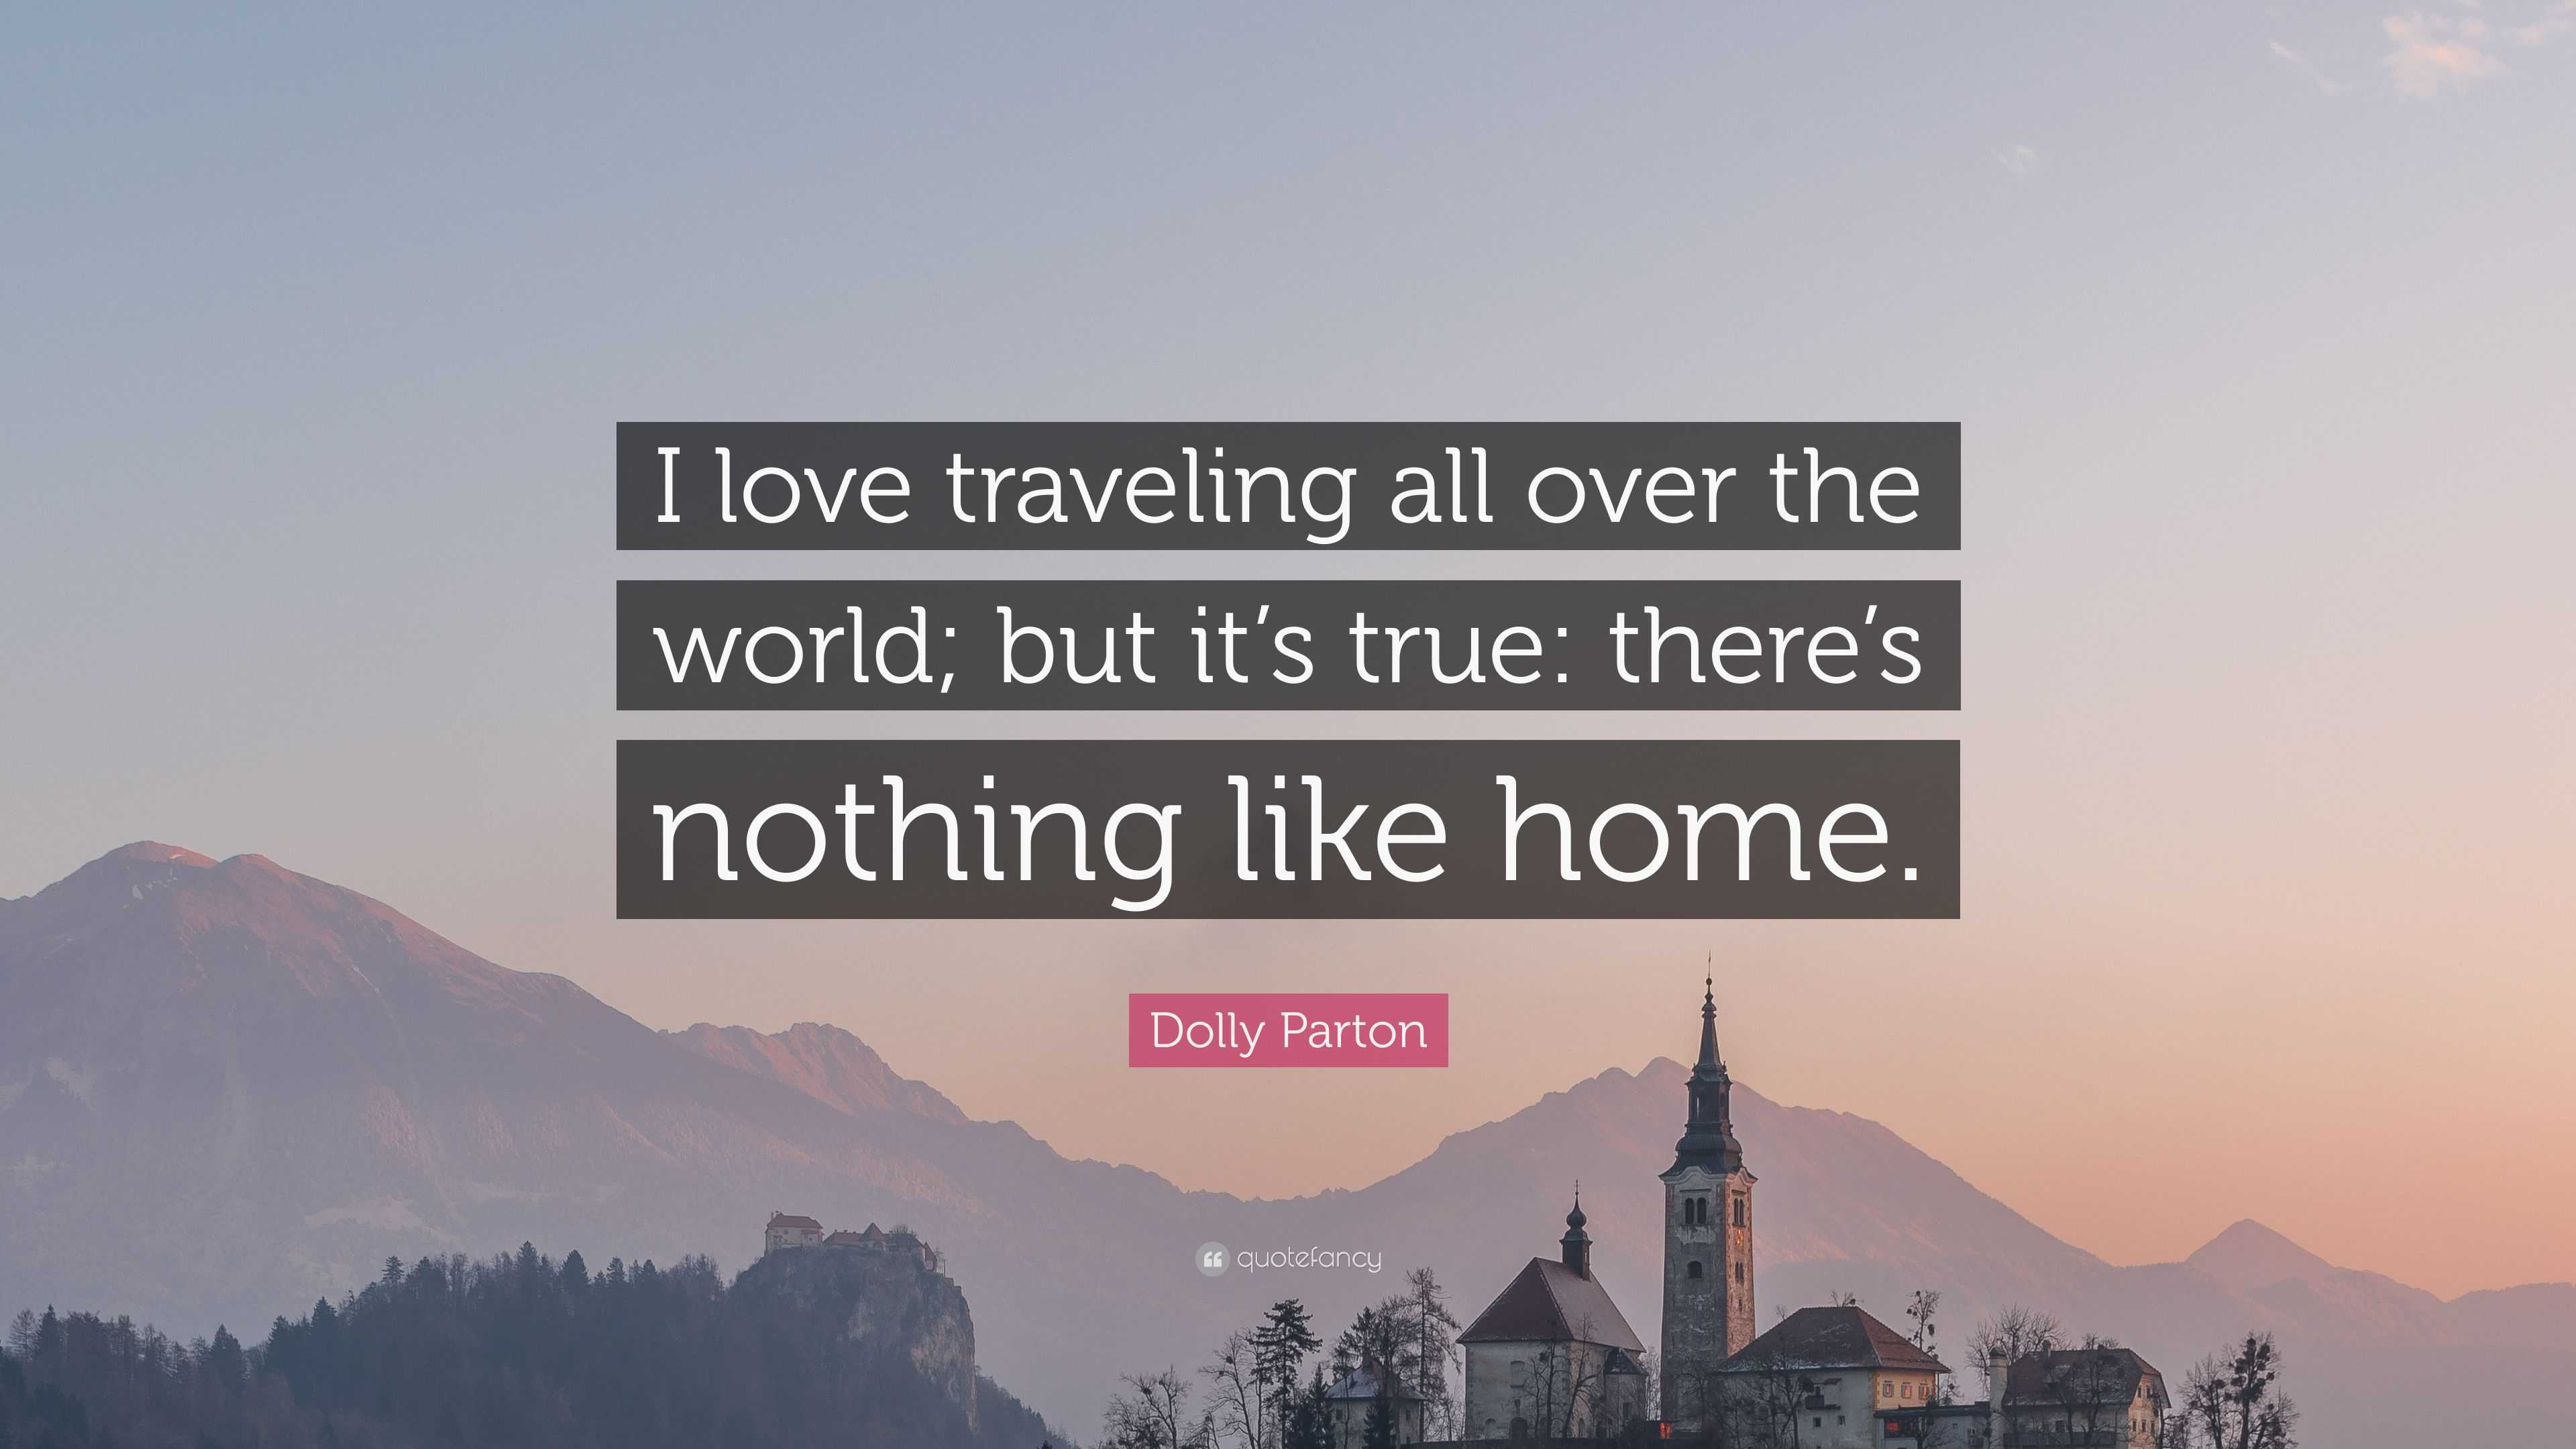 Dolly Parton Quote “I love traveling all over the world but it s true